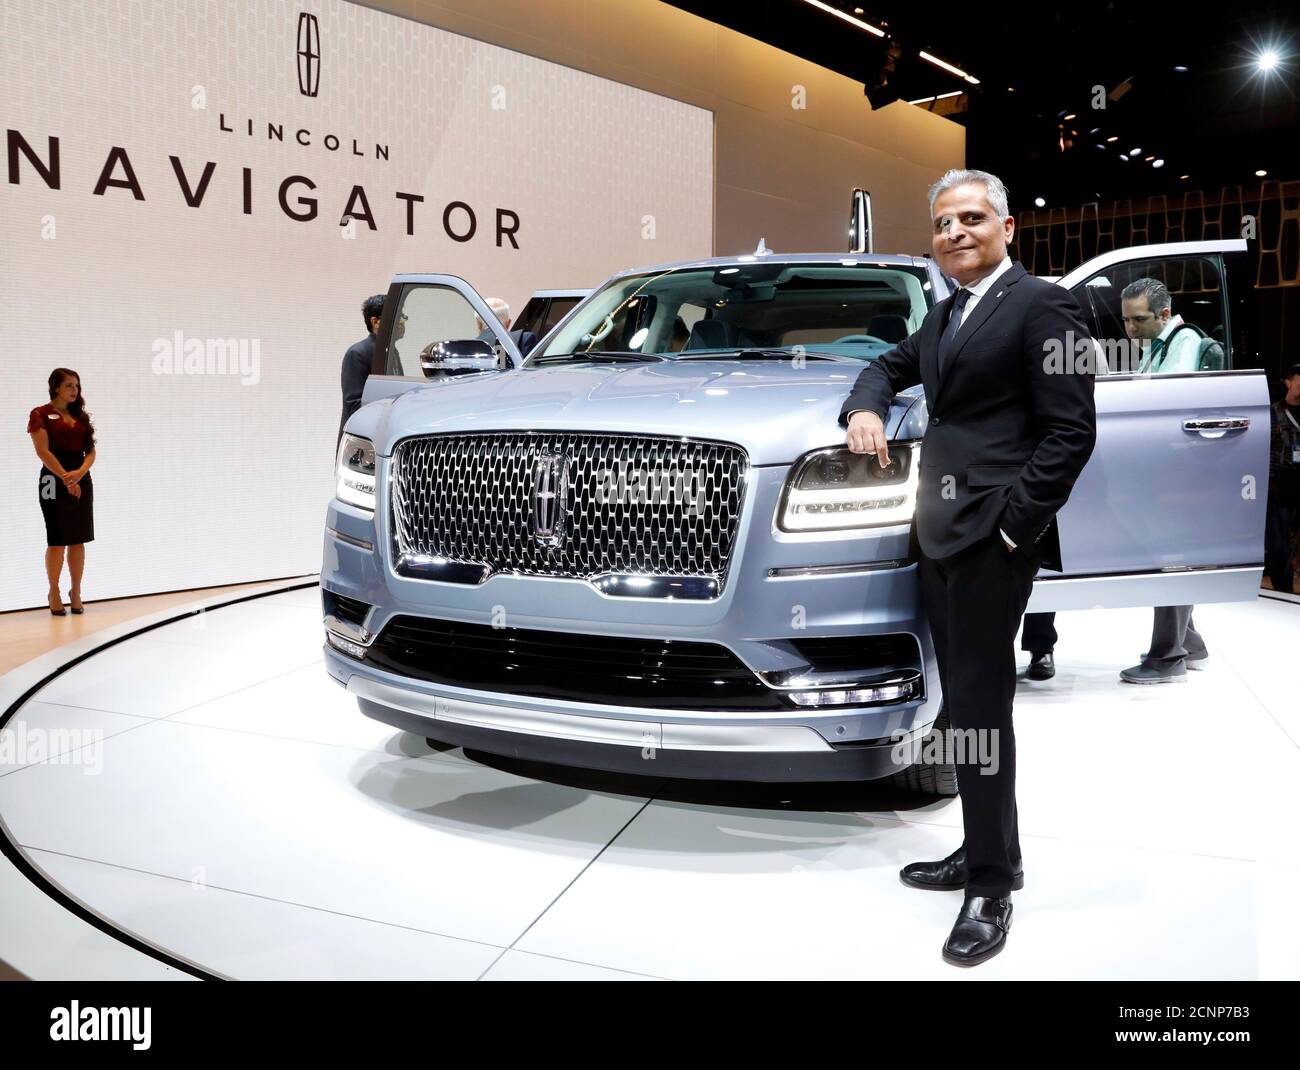 Kumar Galhotra, President of Lincoln Motor Company, poses with the 2018 Lincoln Navigator at the 2017 New York International Auto Show in New York City, U.S. April 12, 2017. REUTERS/Brendan Mcdermid Stock Photo